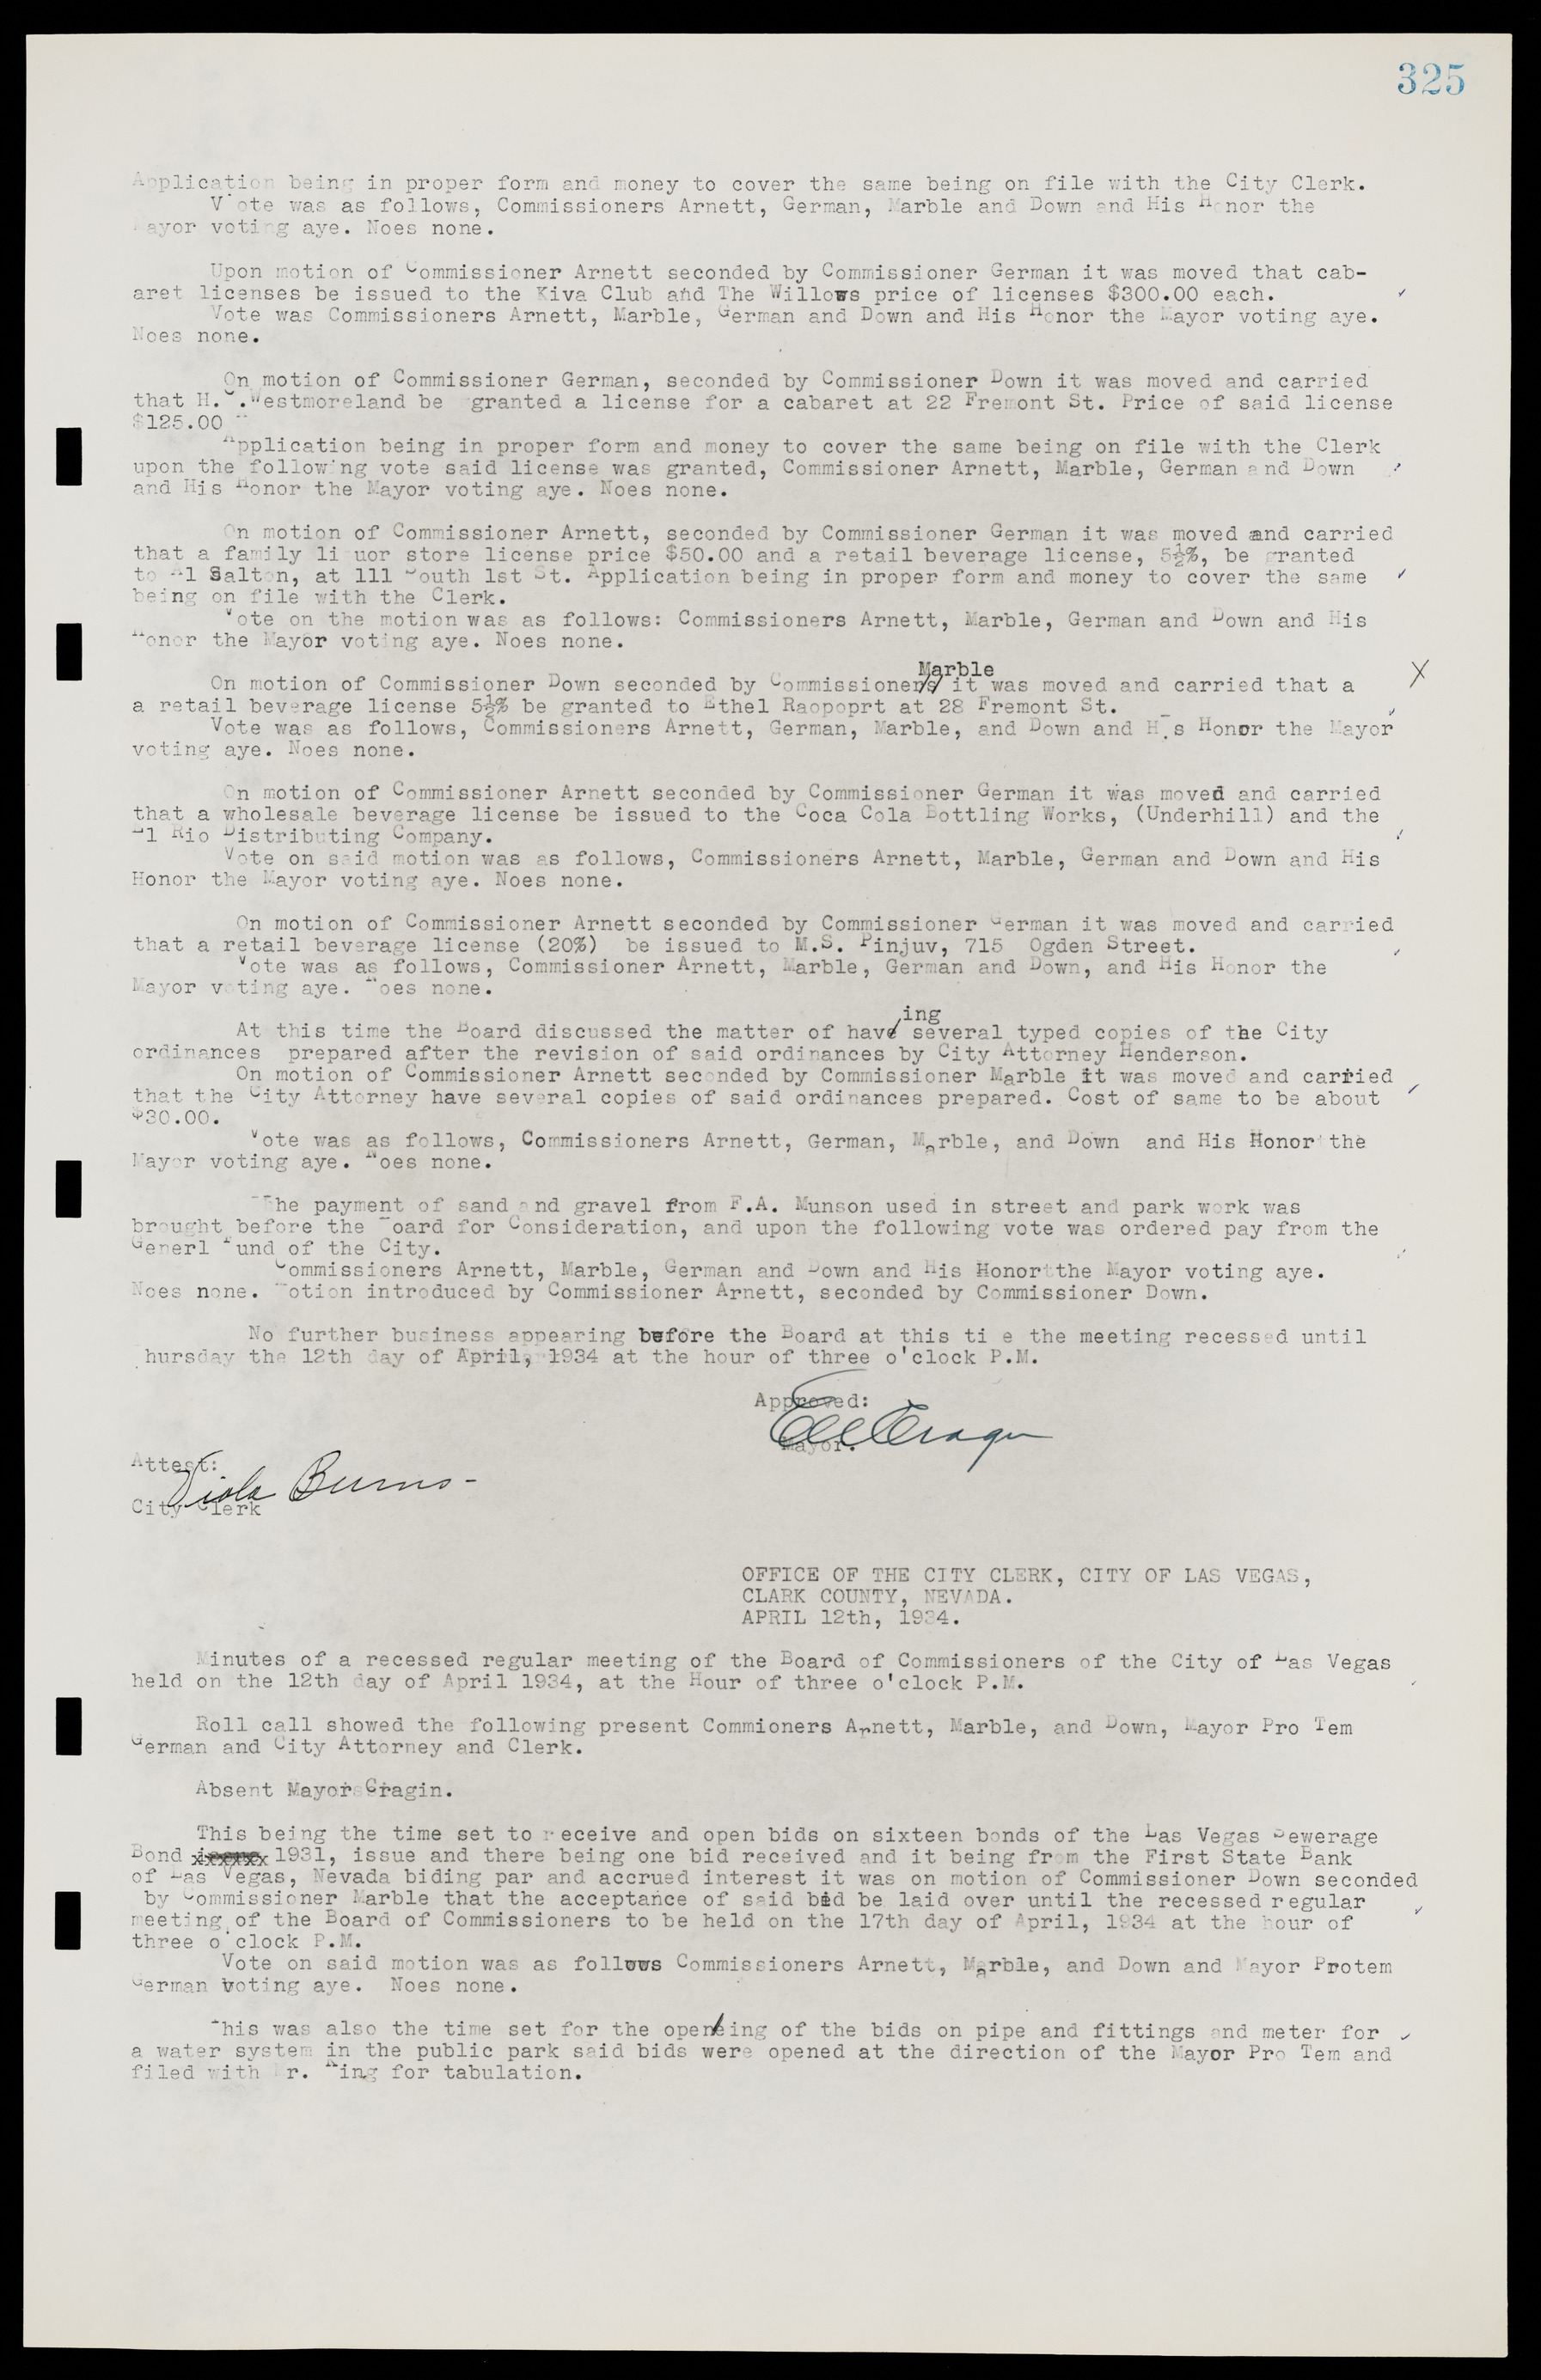 Las Vegas City Commission Minutes, May 14, 1929 to February 11, 1937, lvc000003-332